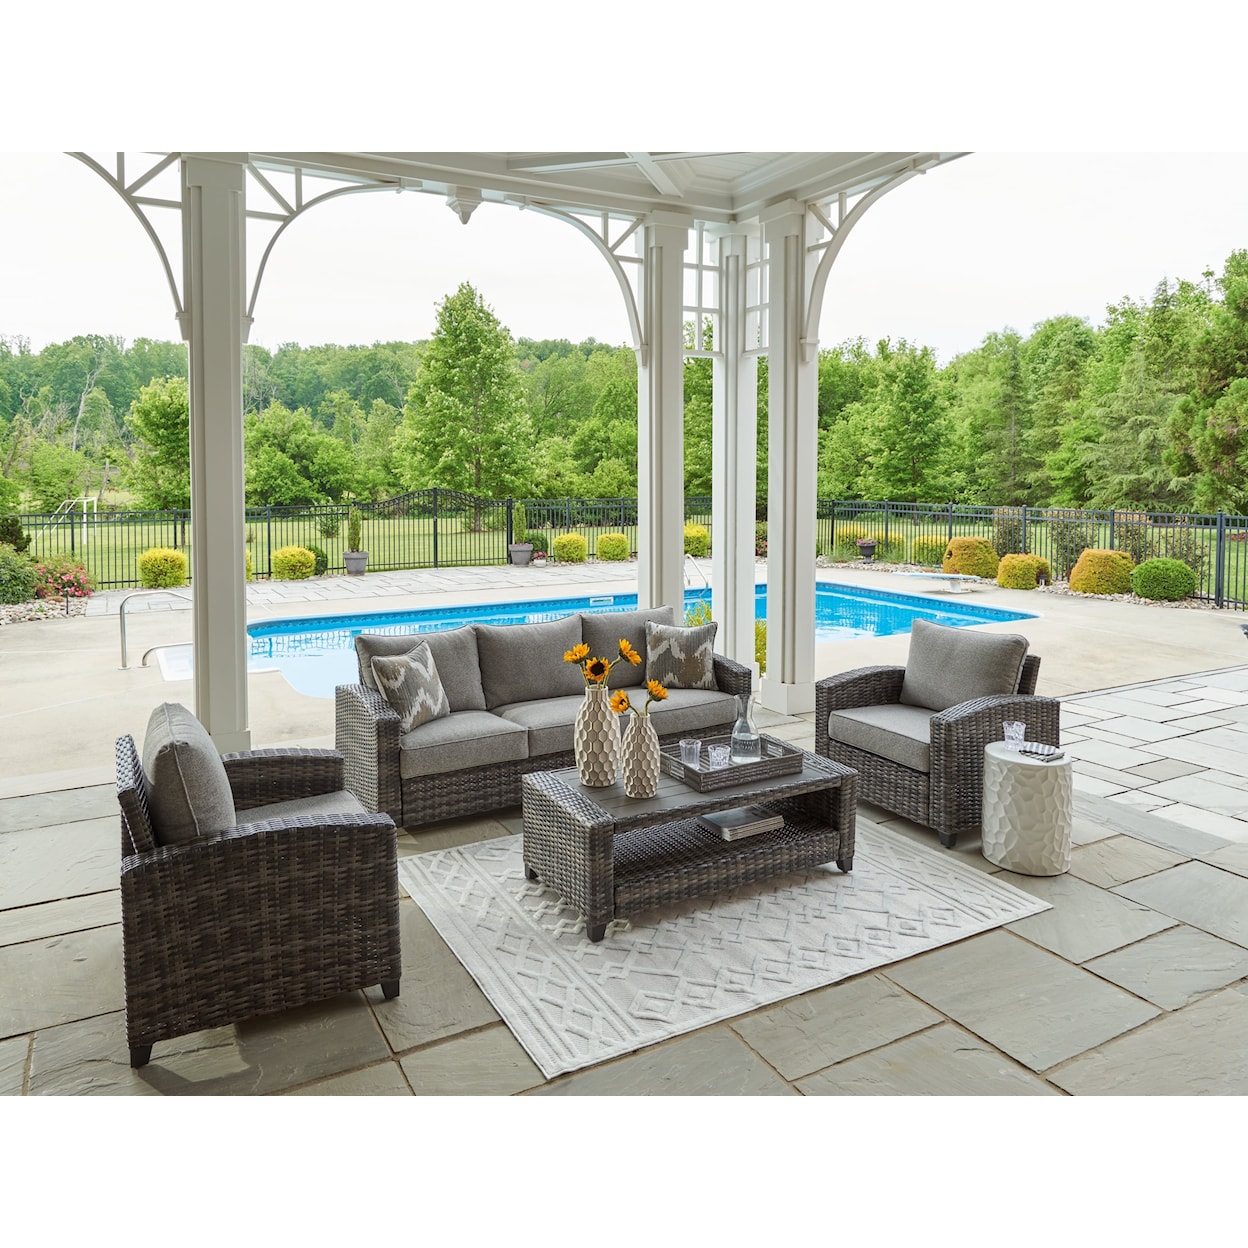 Benchcraft Oasis Court Outdoor Sofa/Chairs/Table Set (Set of 4)